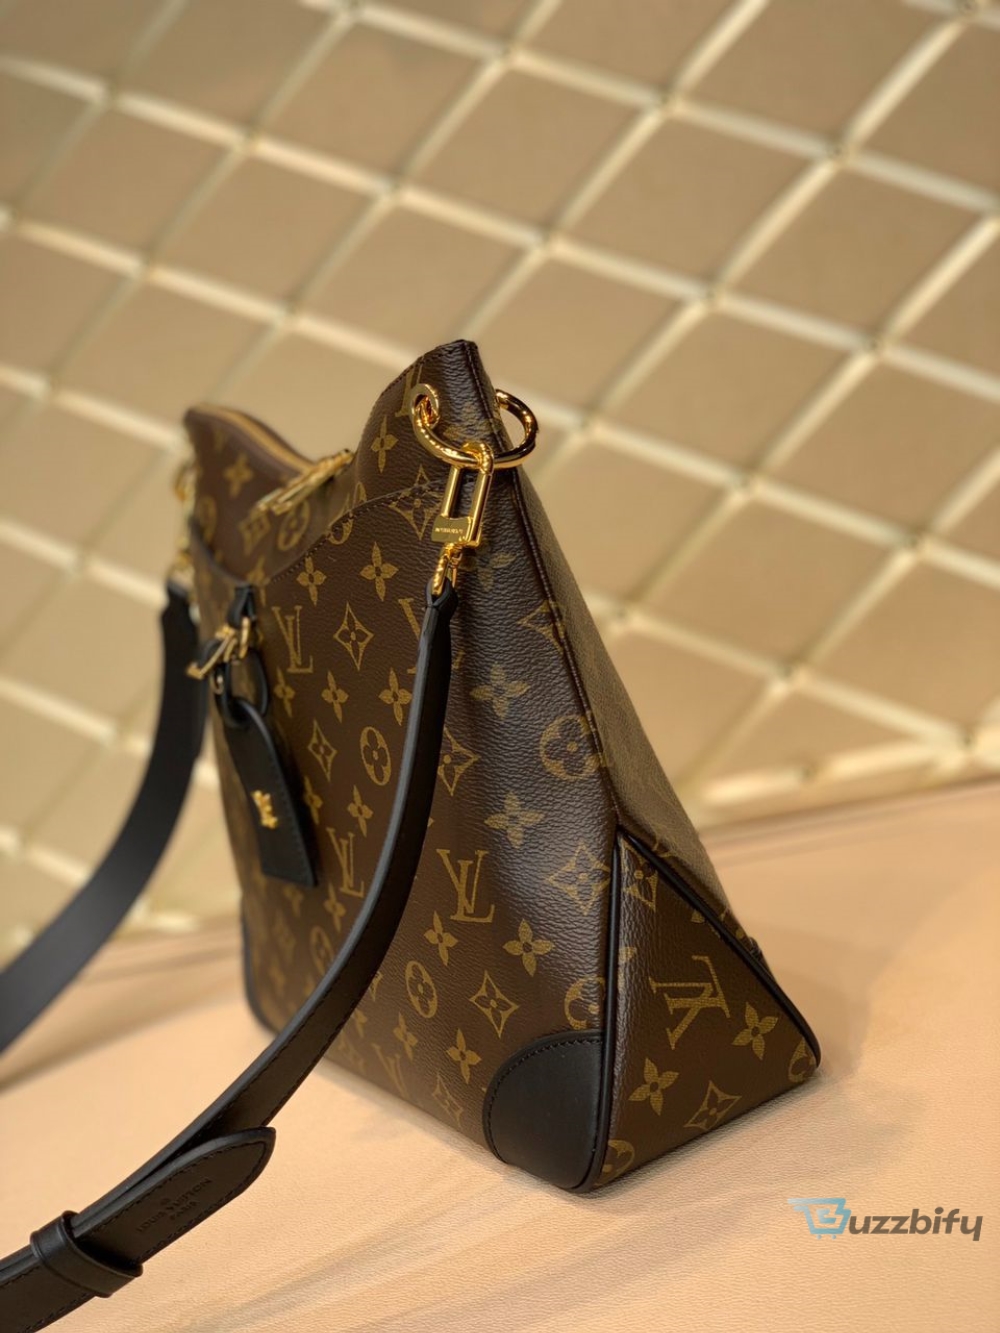 Louis Vuitton Odeon Pm Monogram Canvas For Women Womens Handbags Shoulder And Crossbody Bags 11In28cm Lv M45353  7777